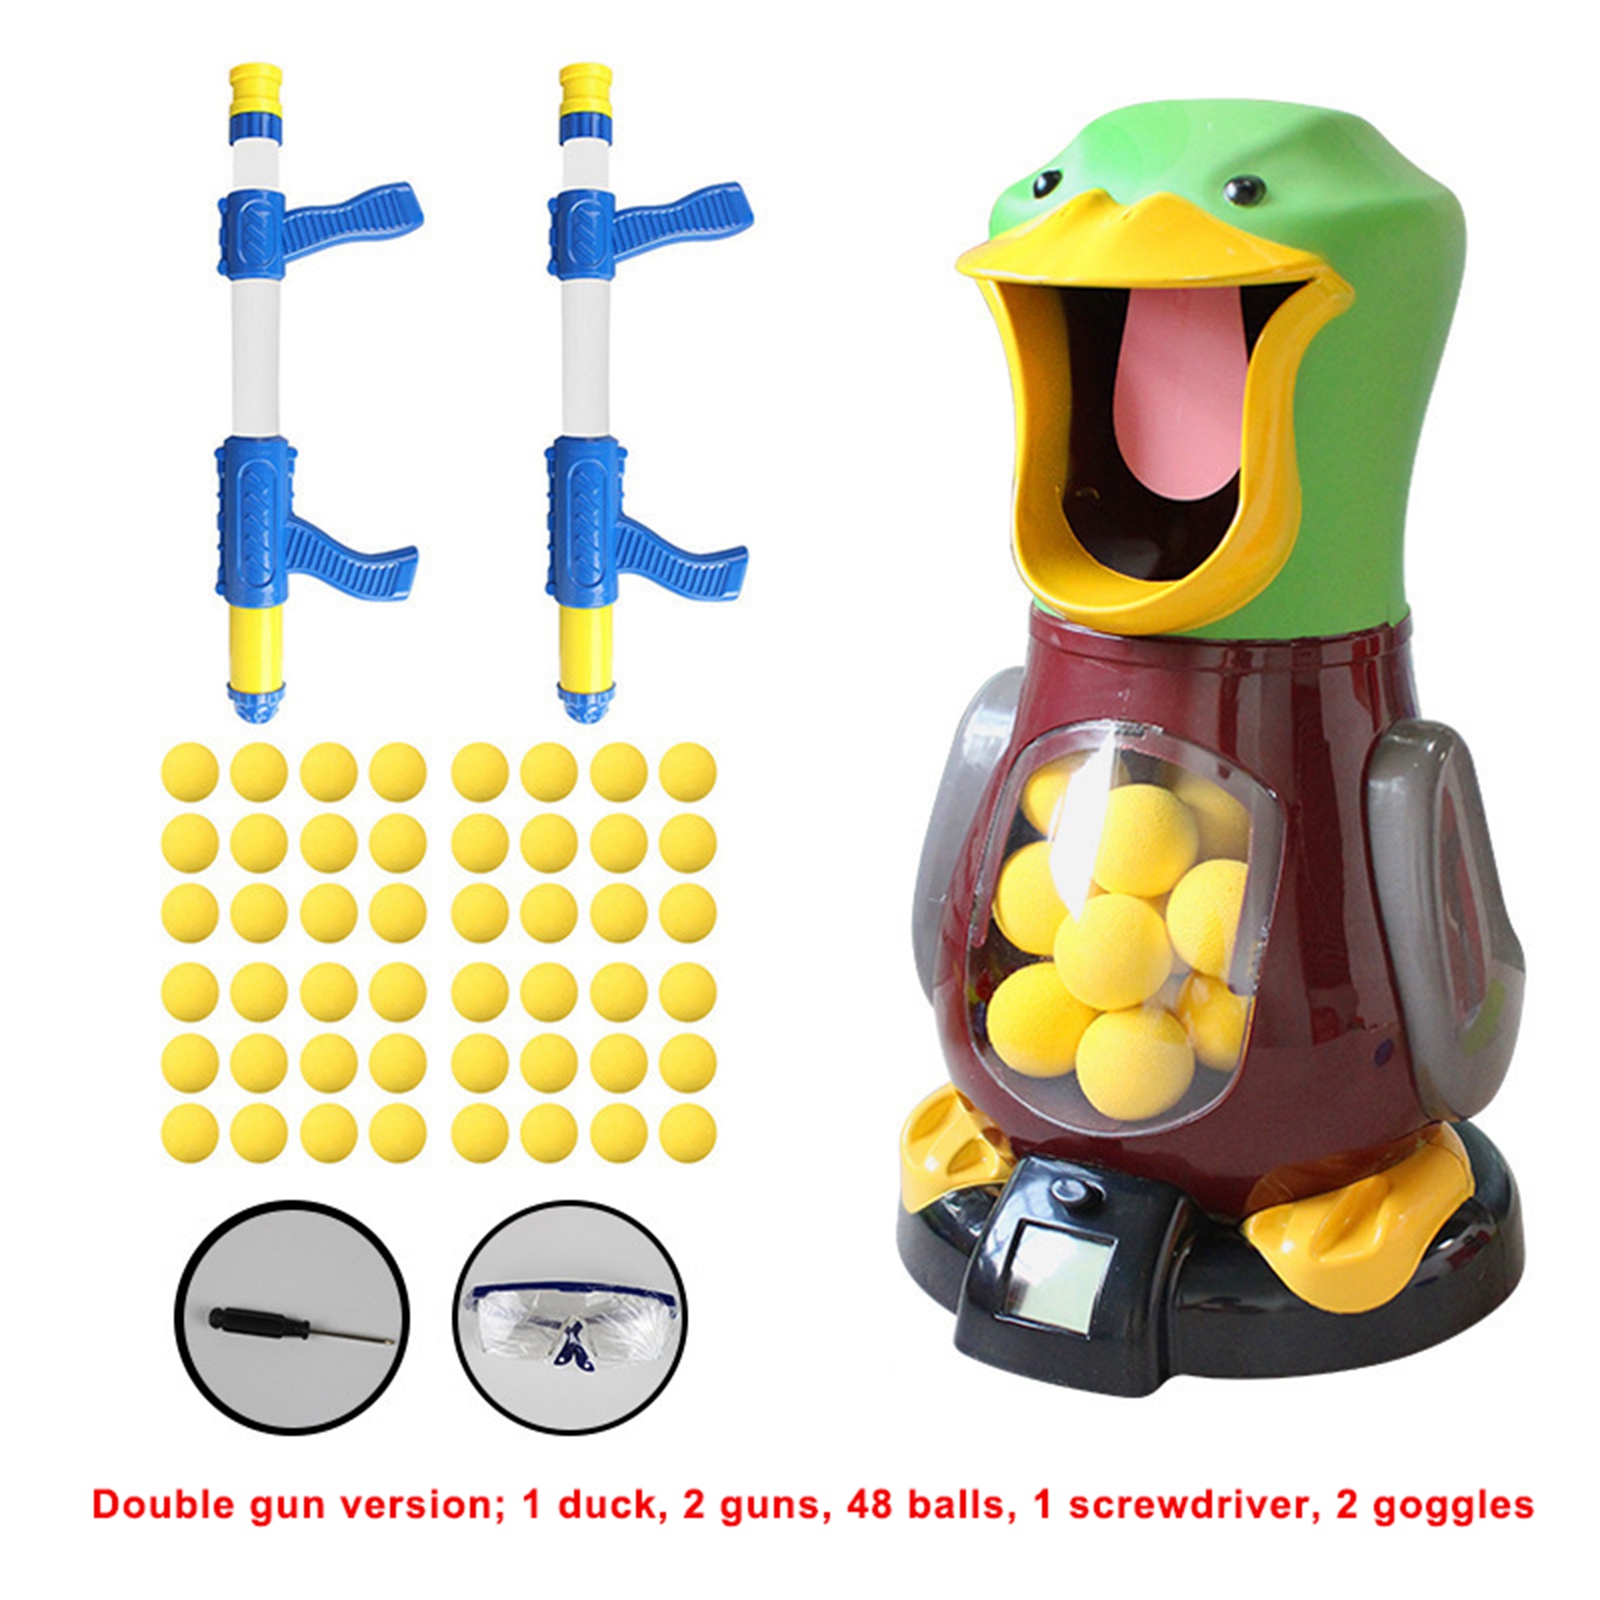 Puloru Shooting Gun Toy, Duck Mouth Sound, Continuous Launch Target Game